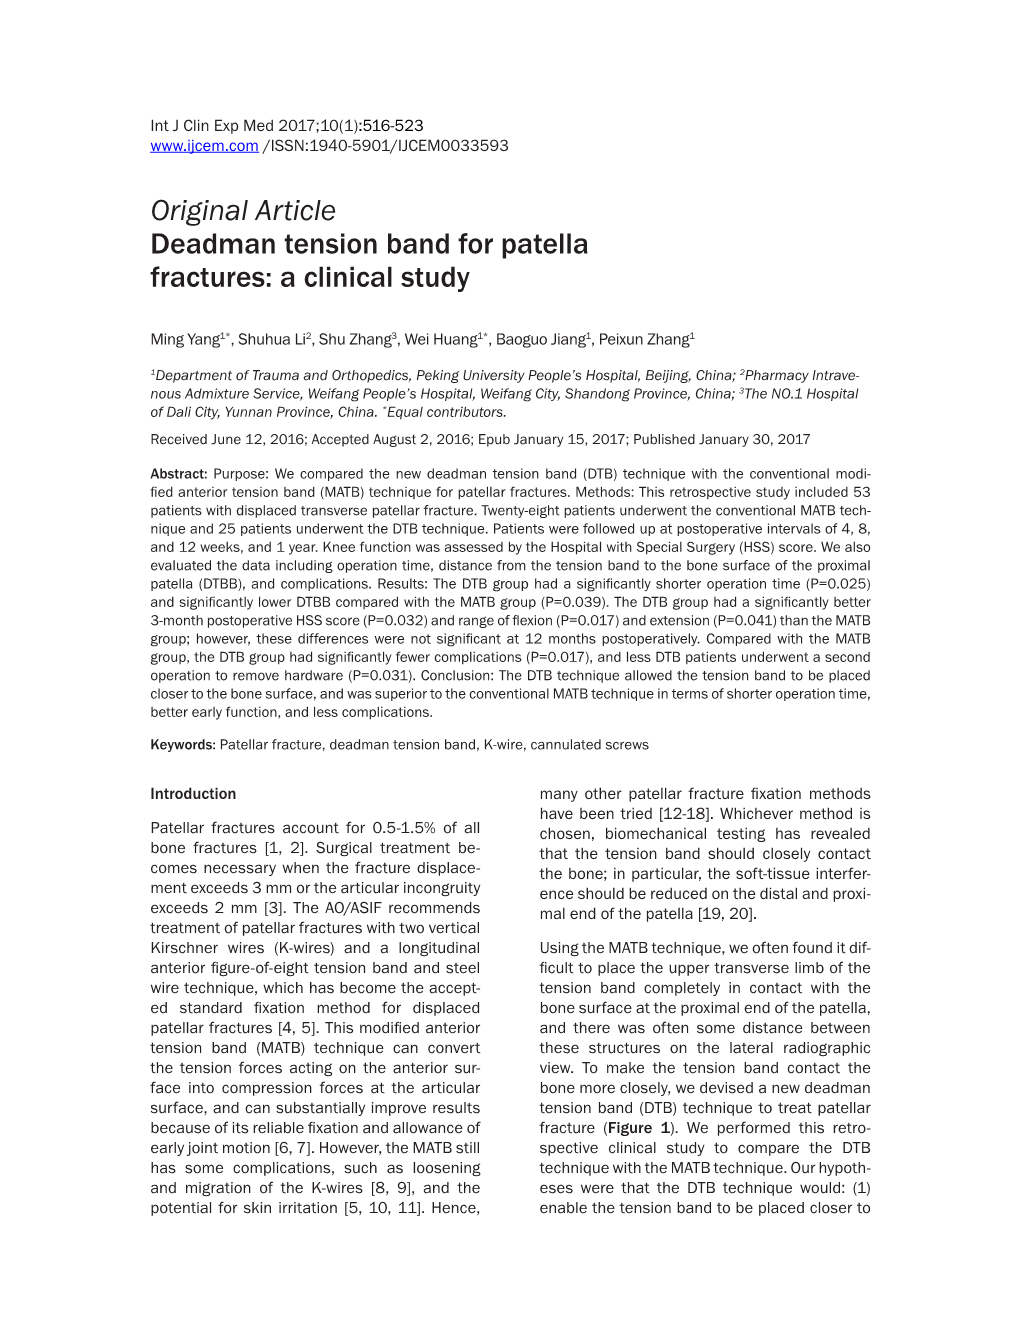 Original Article Deadman Tension Band for Patella Fractures: a Clinical Study